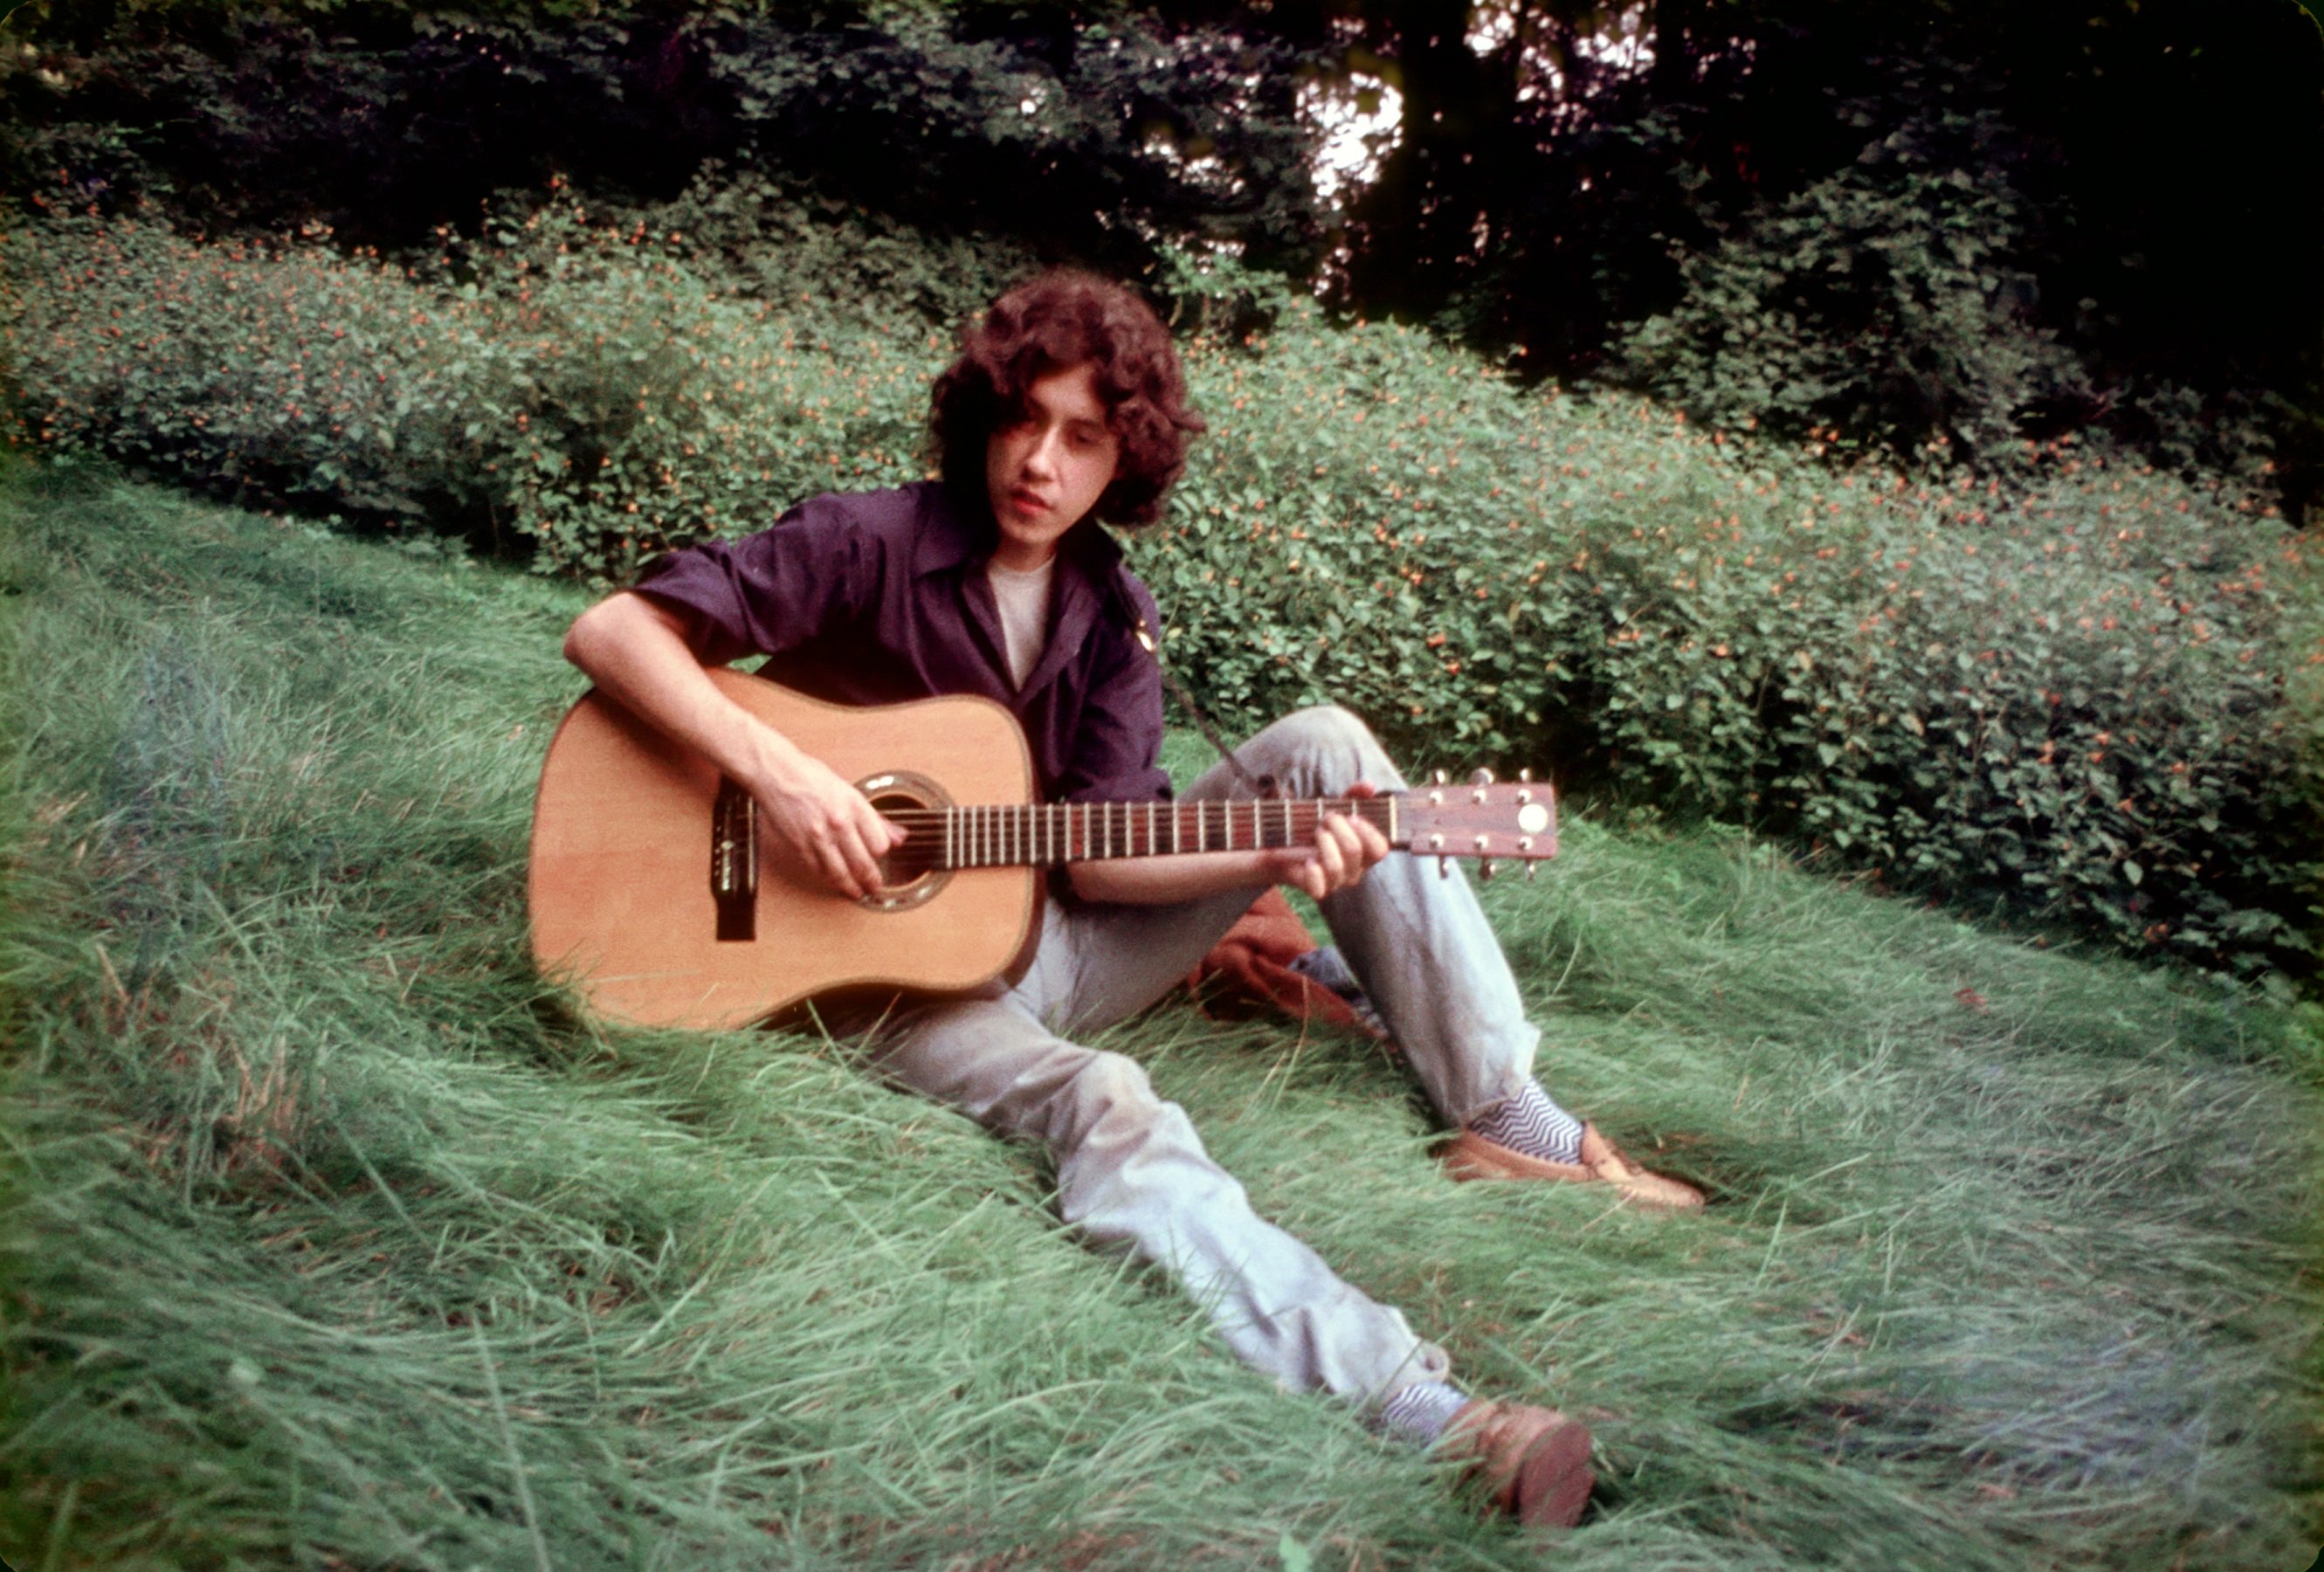 Arlo Guthrie, the singer of the classic Thanksgiving song "Alice's Restaurant," sitting on the grass with his guitar